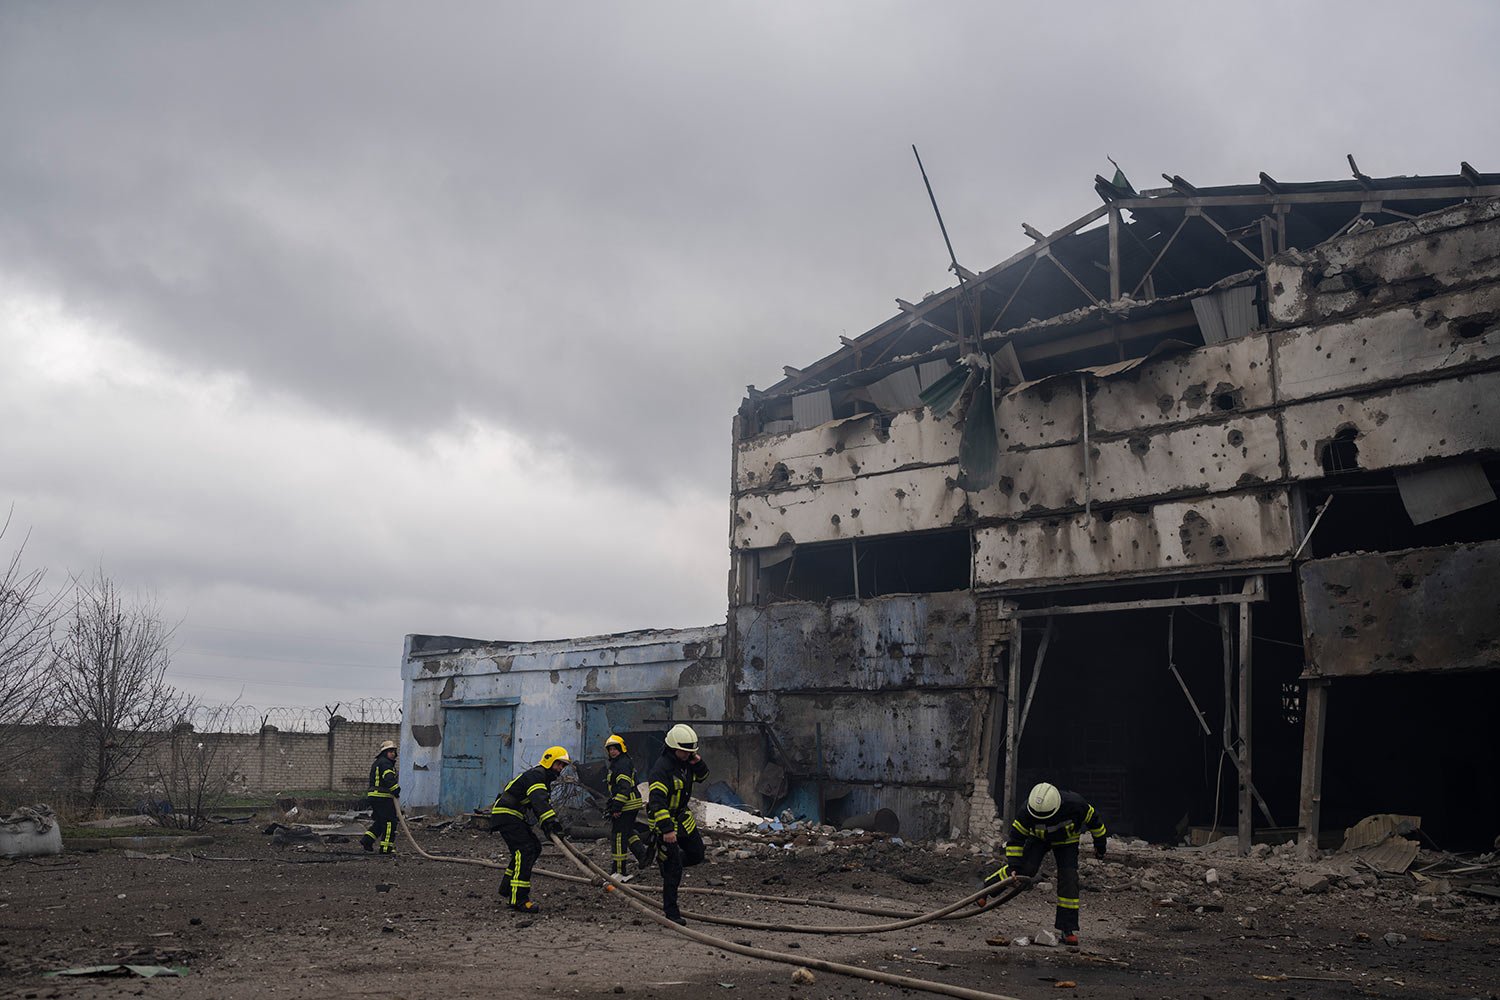  Firefighters try to extinguish the fire at a damaged factory following a Russian bombing in Kramatorsk, Ukraine, Thursday, April 14, 2022. (AP Photo/Petros Giannakouris) 